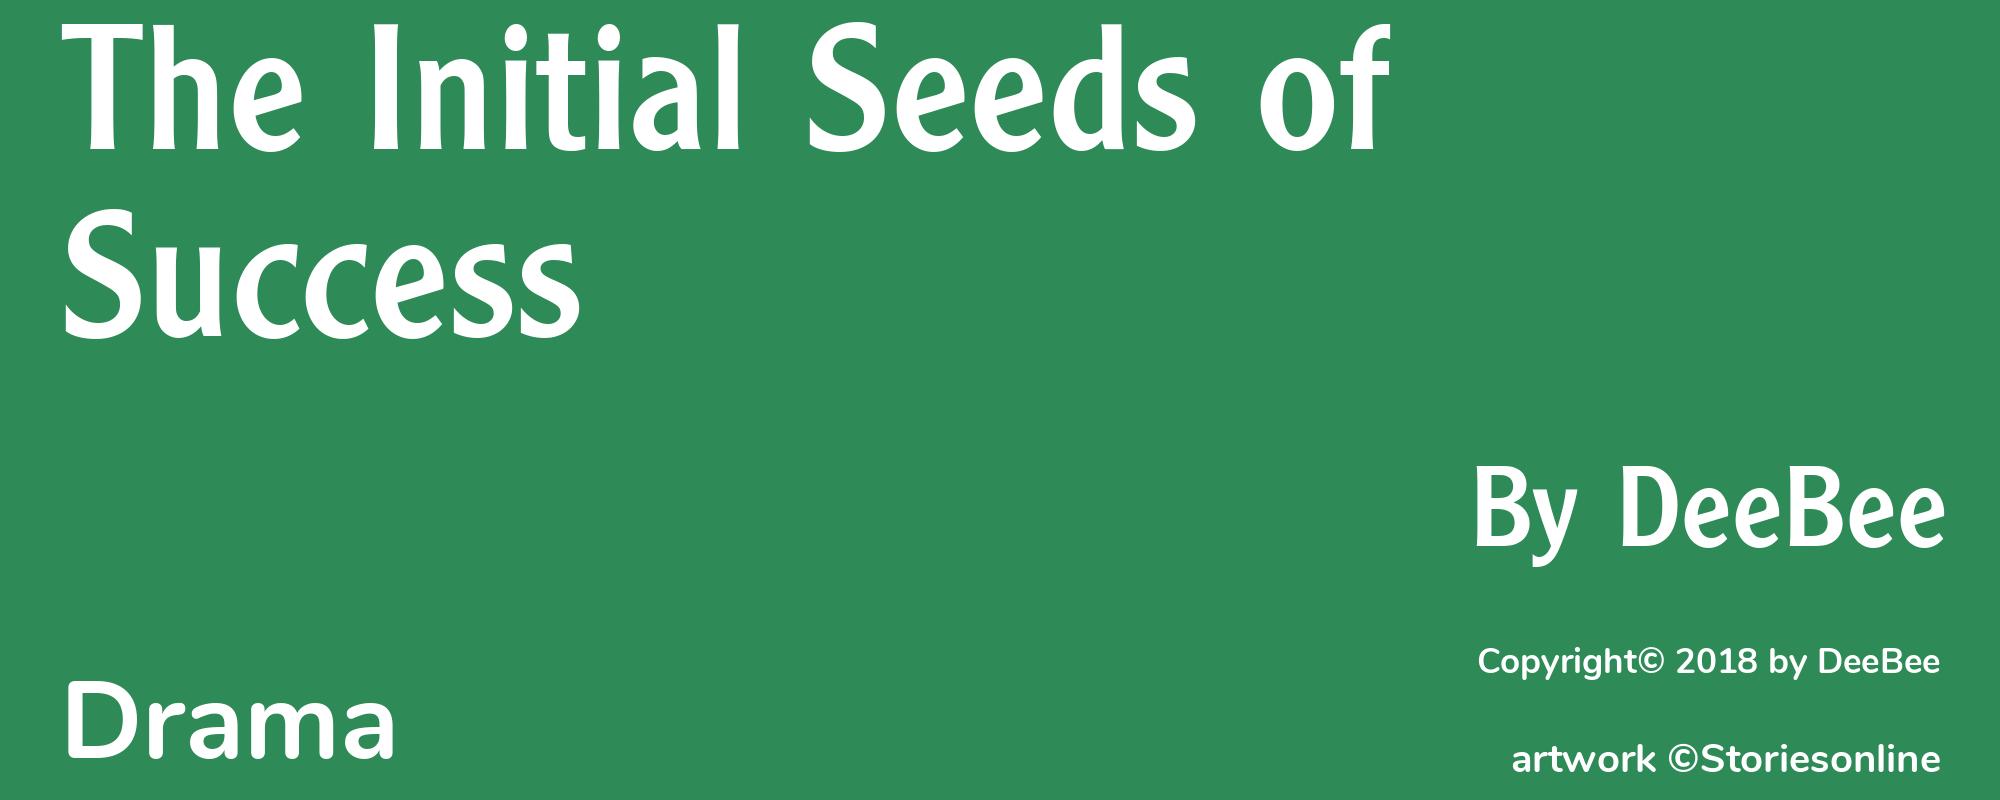 The Initial Seeds of Success - Cover